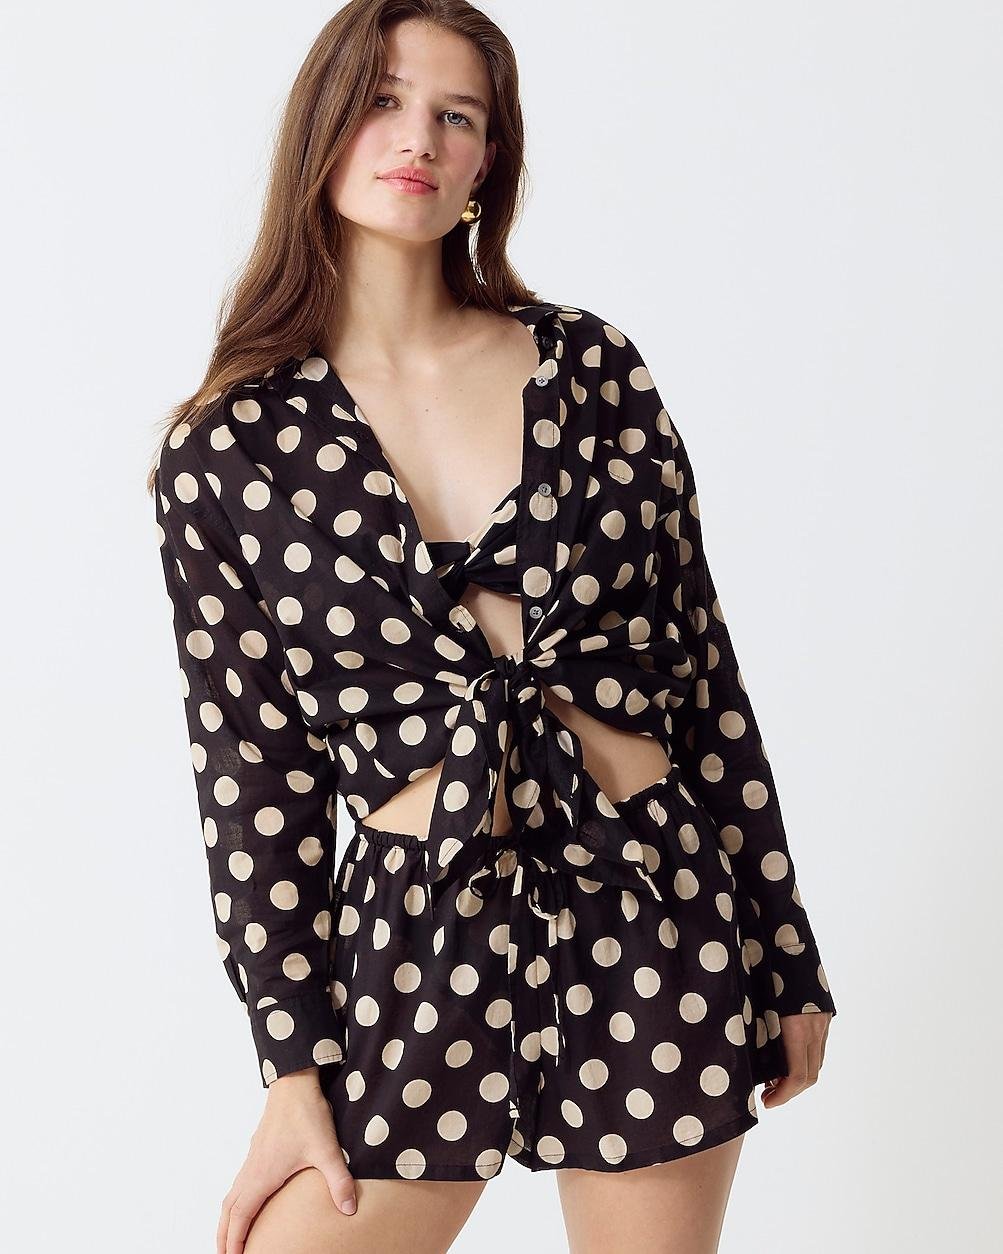 Cotton voile beach shirt in dot print by J.CREW